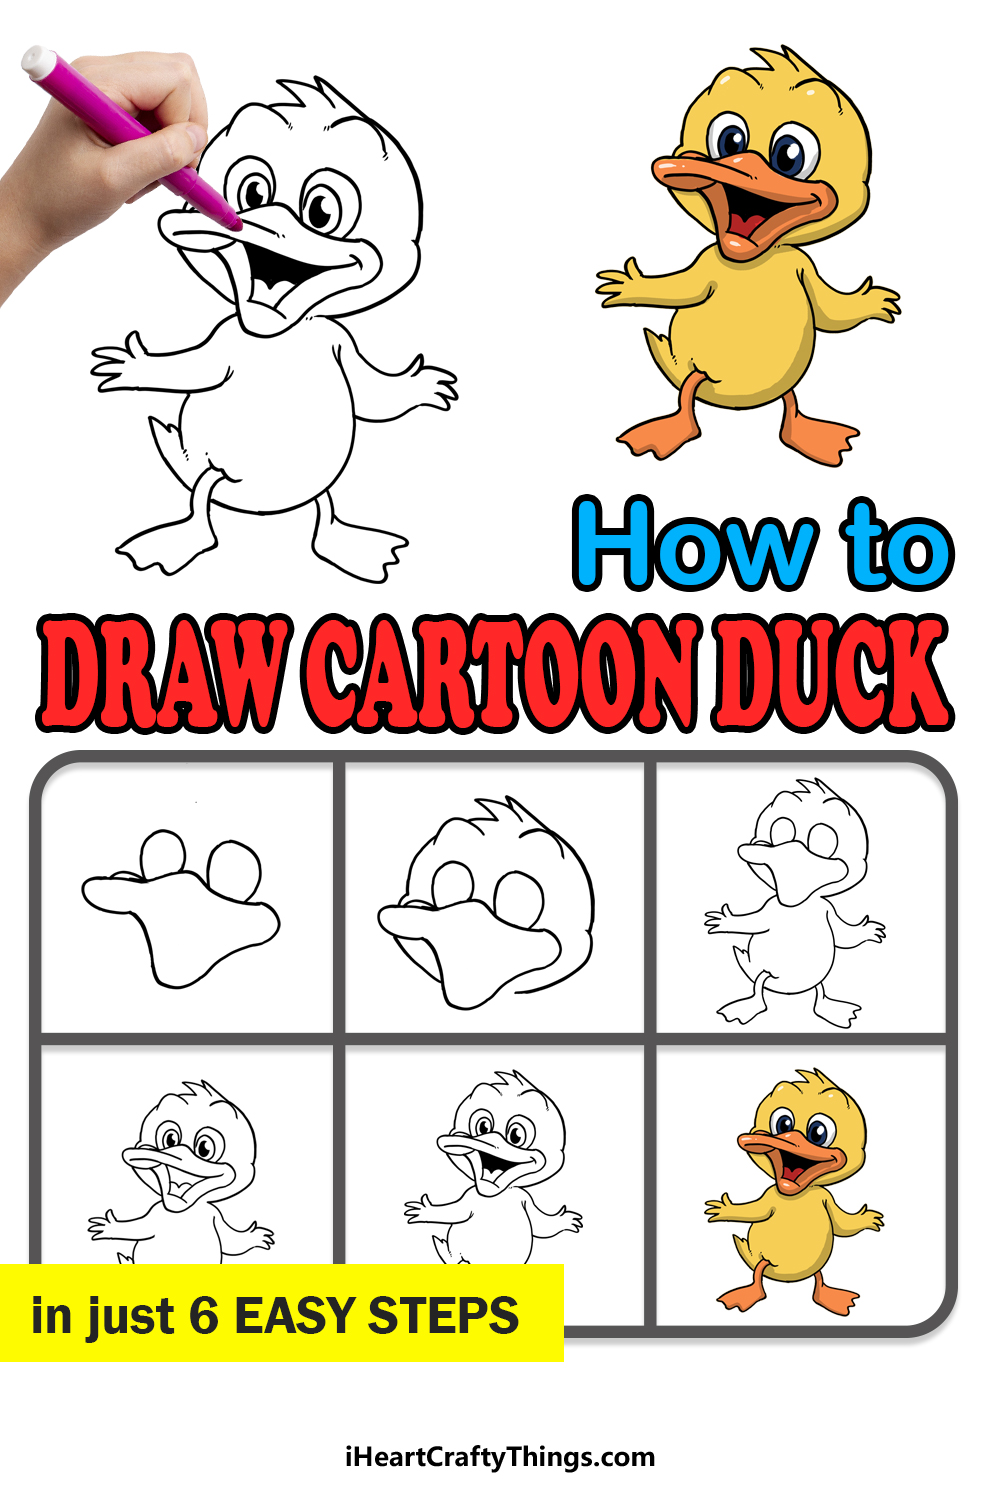 How to Draw A Cartoon Duck step by step guide